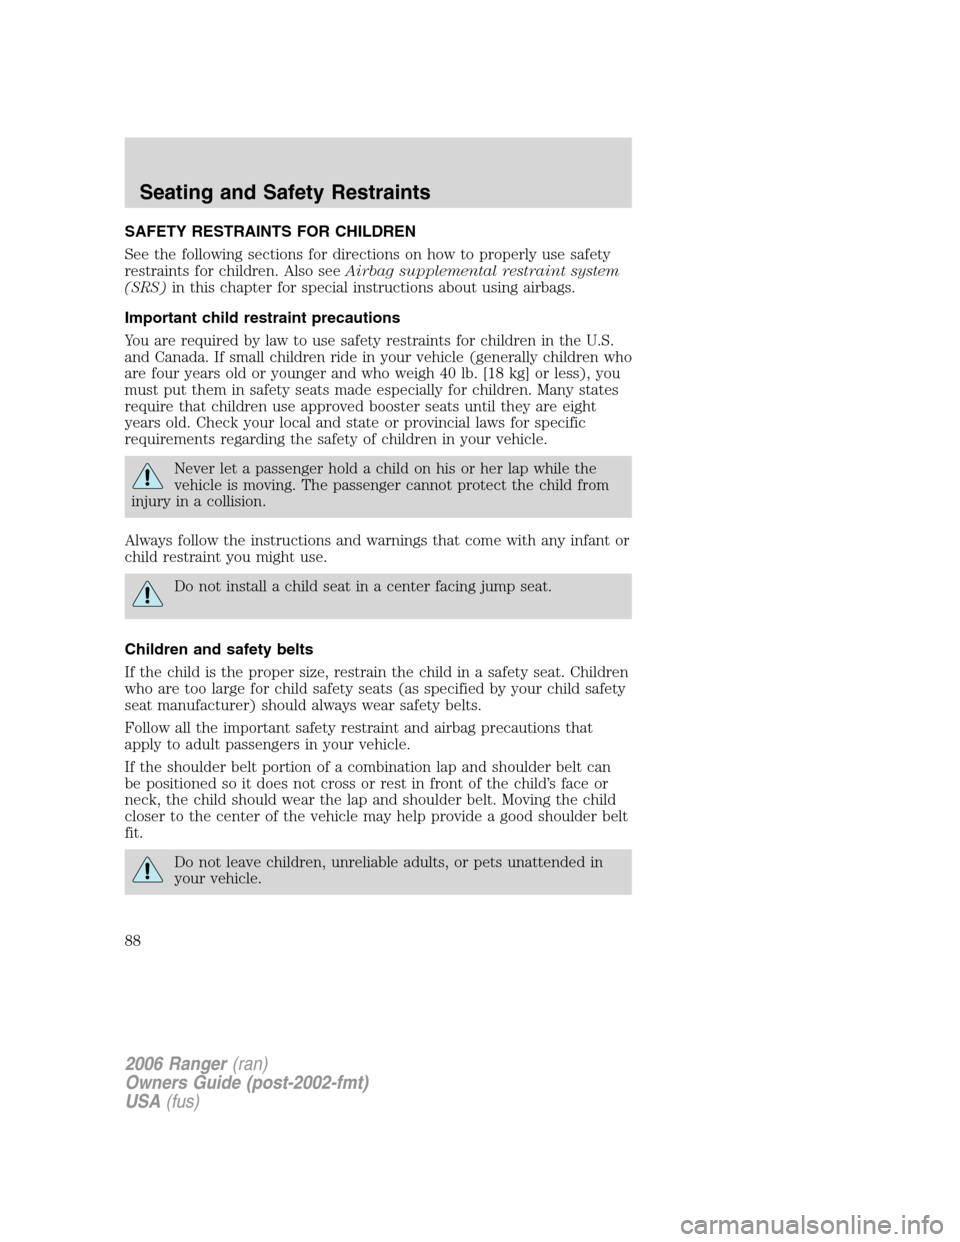 FORD RANGER 2006 2.G Owners Manual SAFETY RESTRAINTS FOR CHILDREN
See the following sections for directions on how to properly use safety
restraints for children. Also seeAirbag supplemental restraint system
(SRS)in this chapter for sp